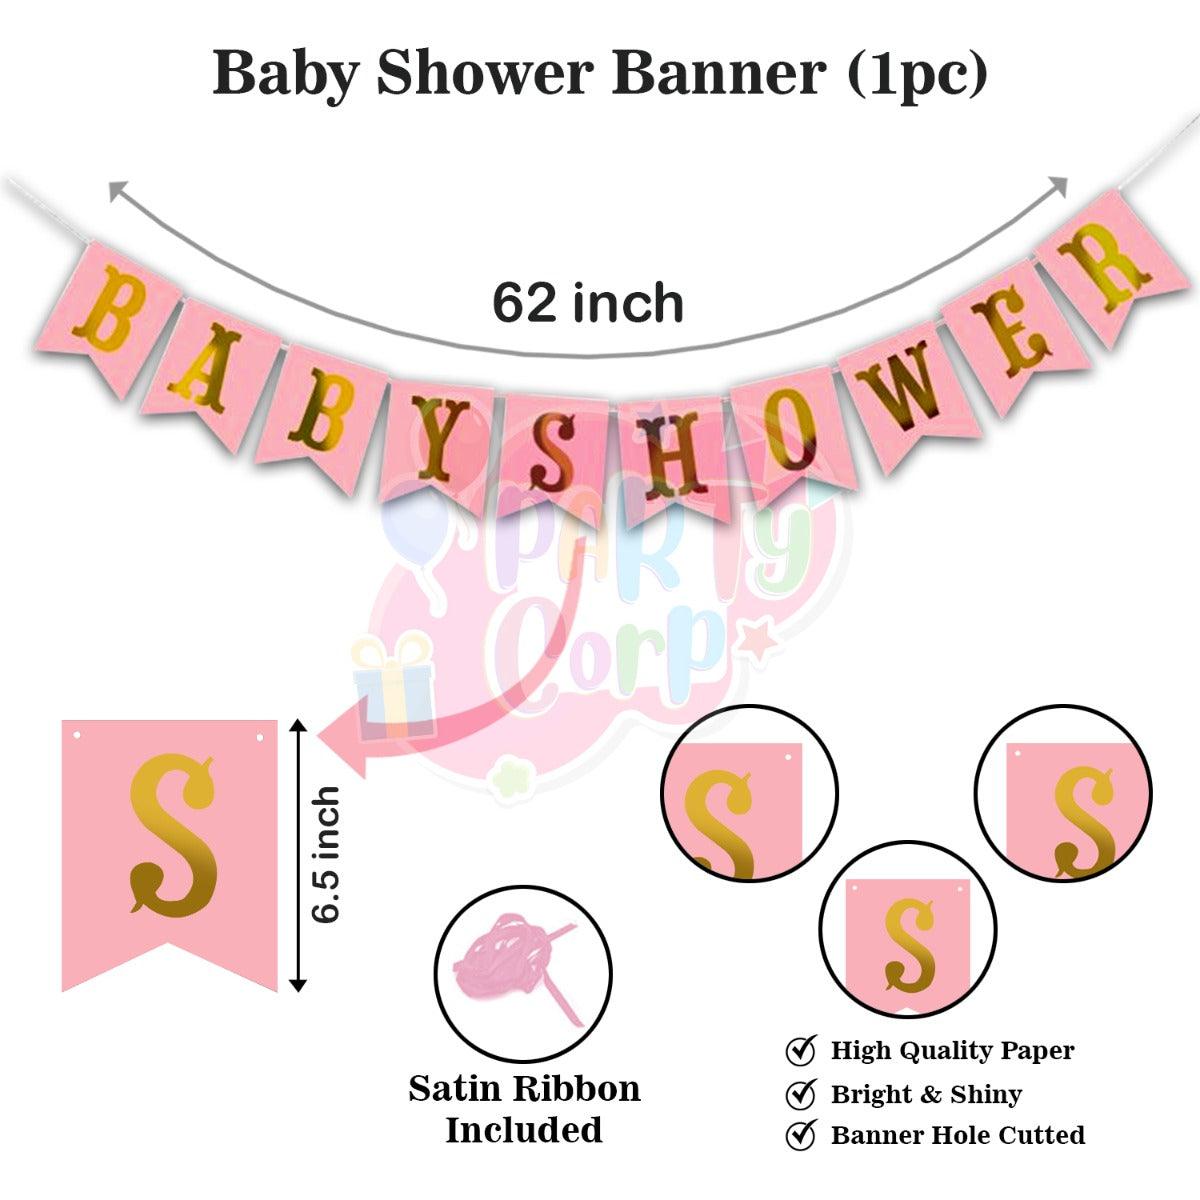 PartyCorp Baby Shower Decoration Kit Combo 35 Pcs - Gold, Pink Chrome & Confetti Balloons, Pink & Gold Banner, Pink Curtain, Gold Star Foil